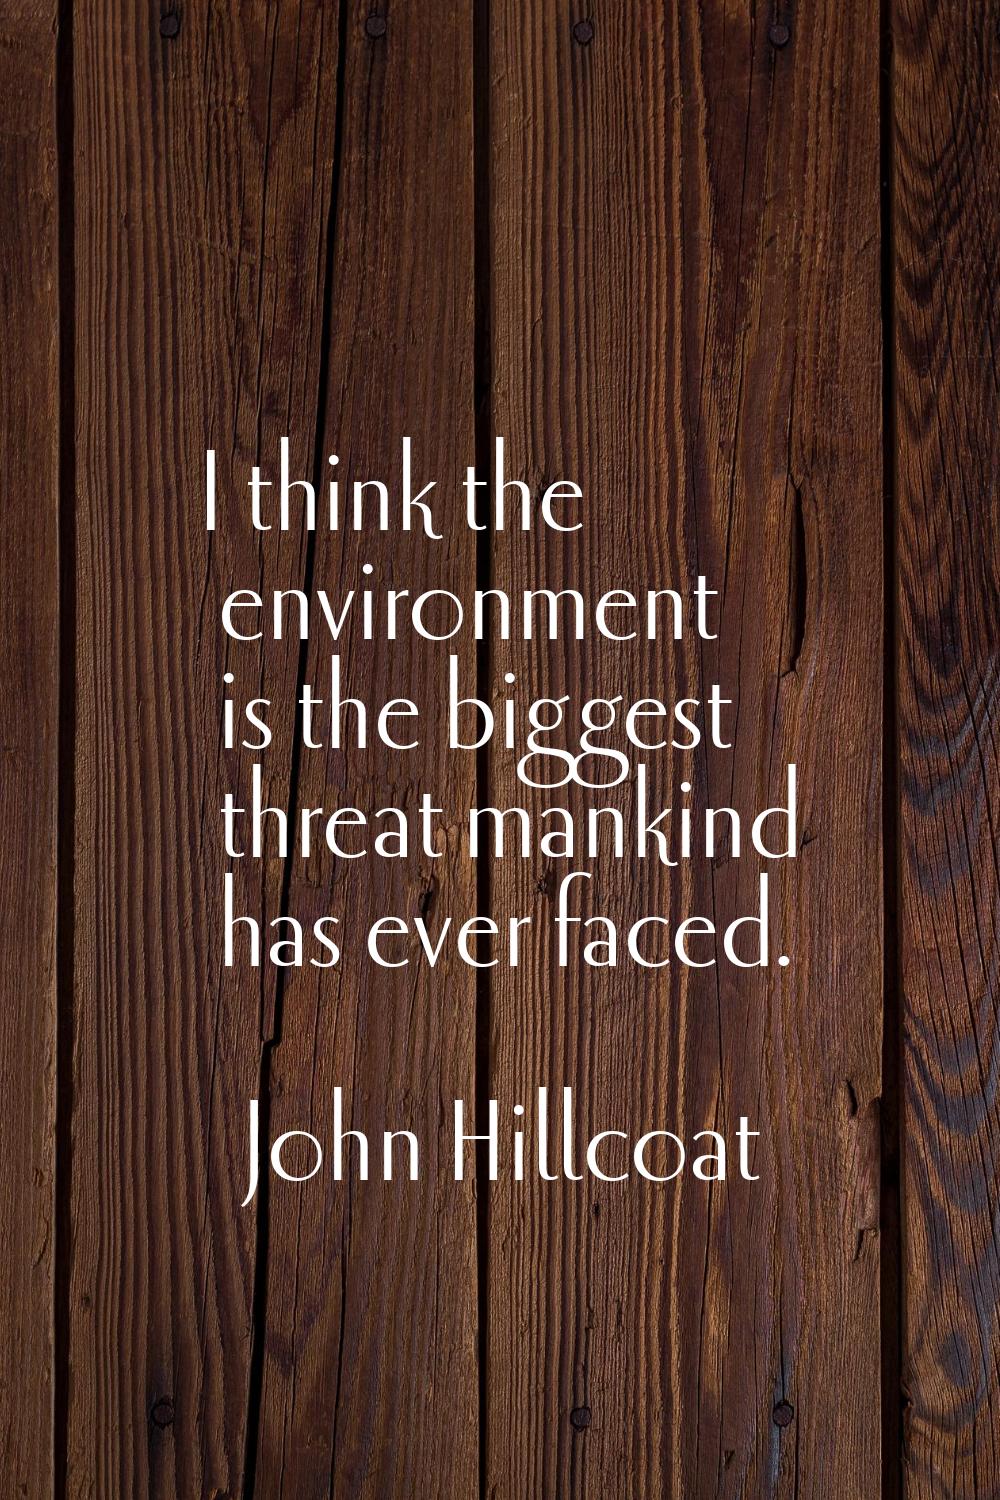 I think the environment is the biggest threat mankind has ever faced.